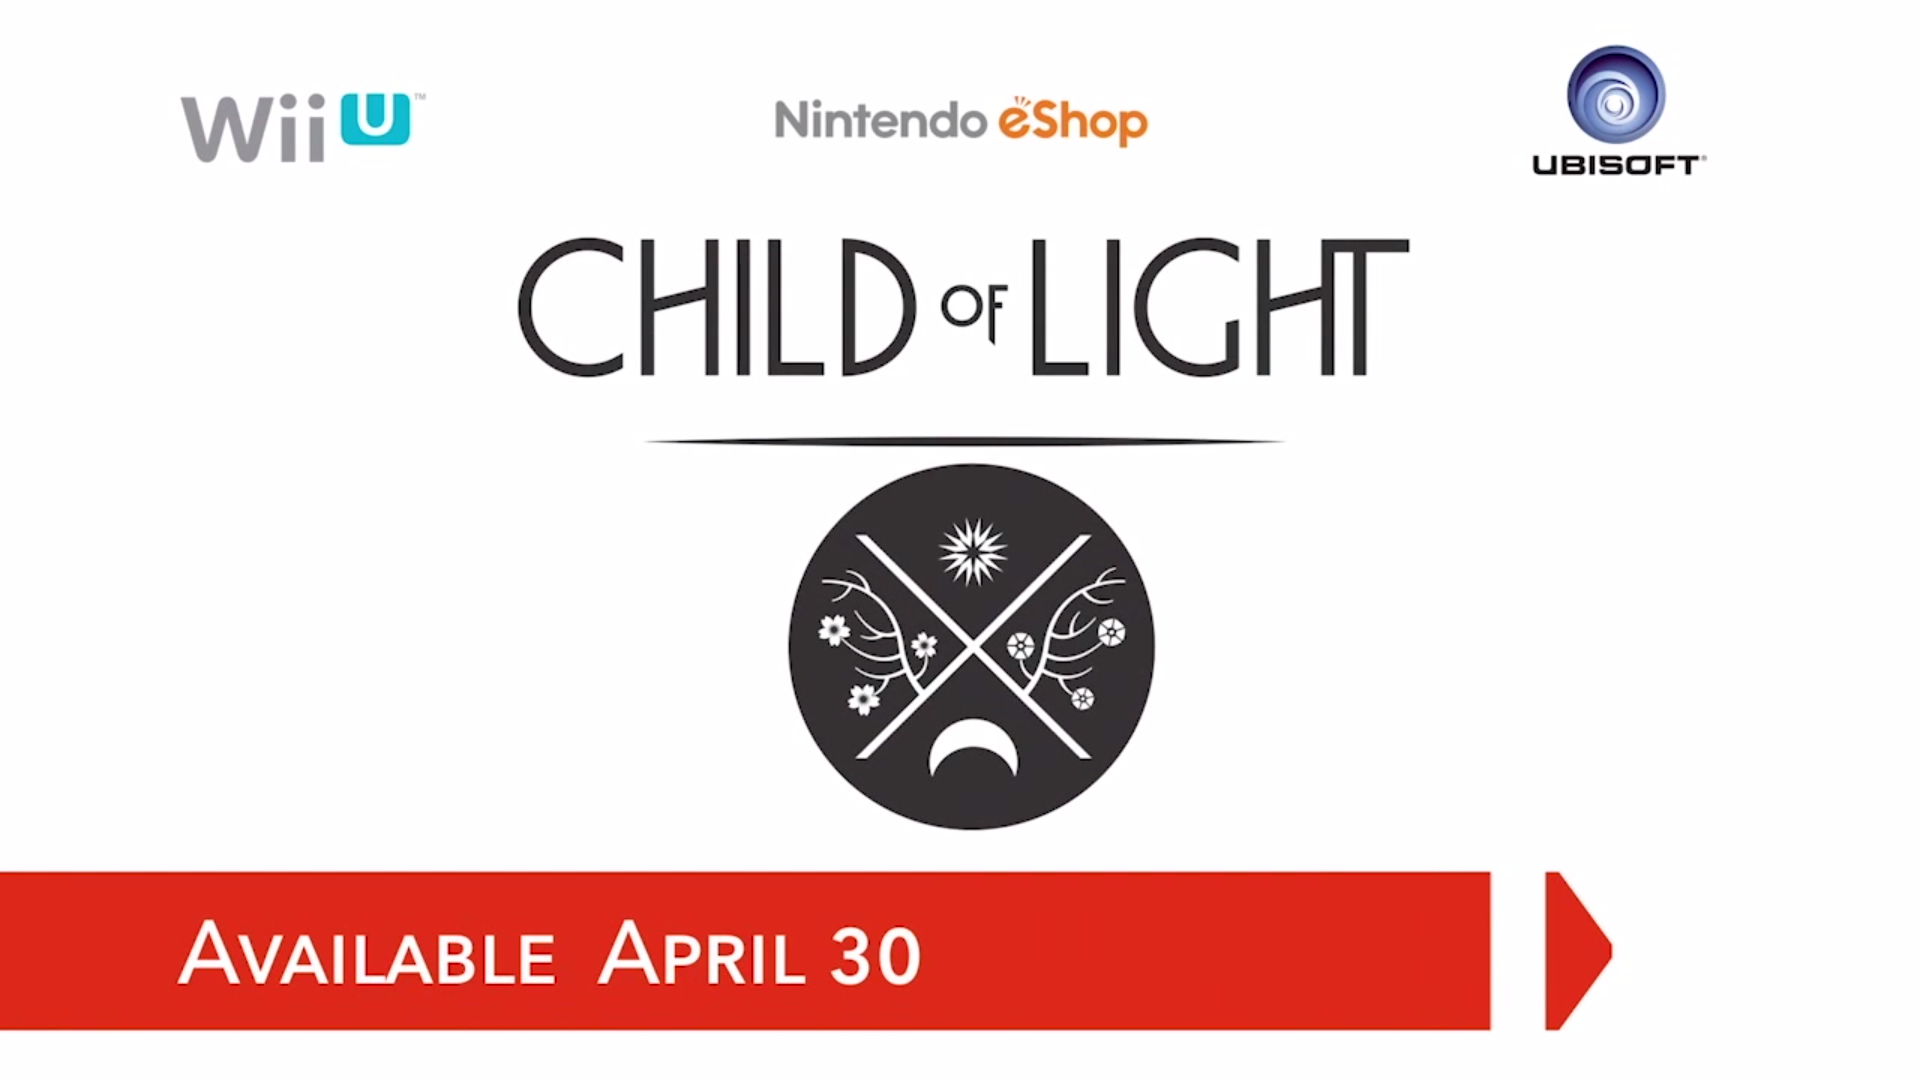 Child of Light Releases For Wii U On April 30